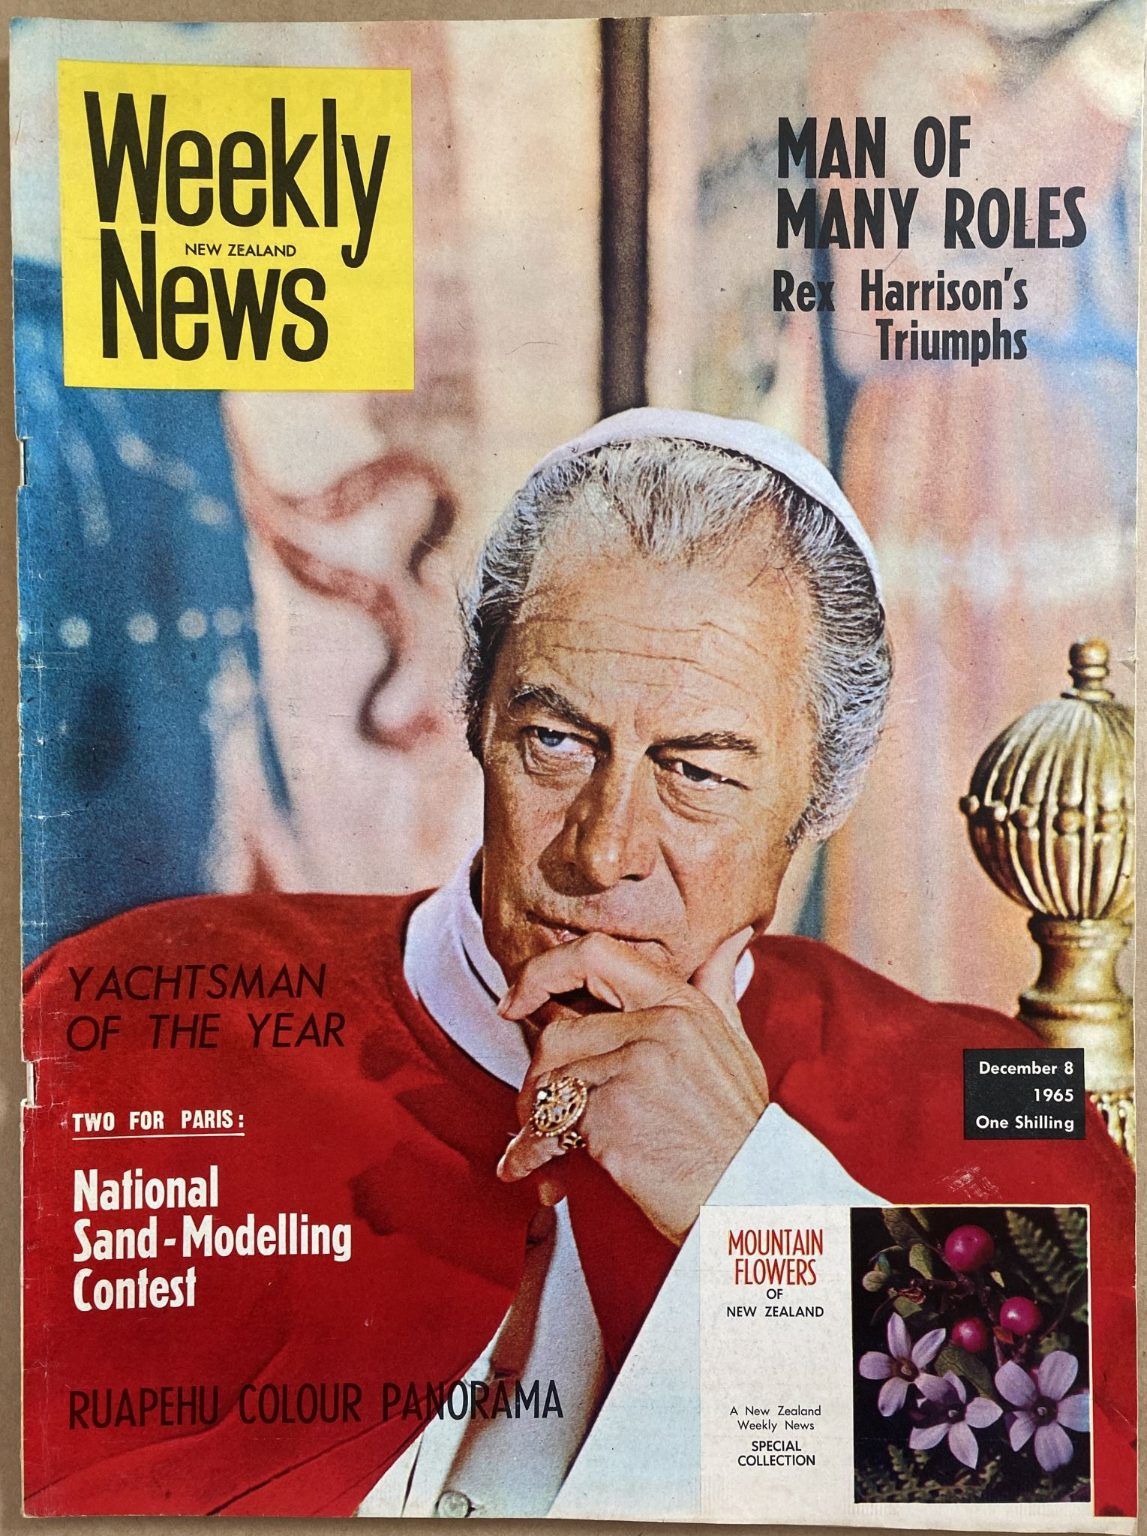 OLD NEWSPAPER: New Zealand Weekly News, No. 5324, 8 December 1965